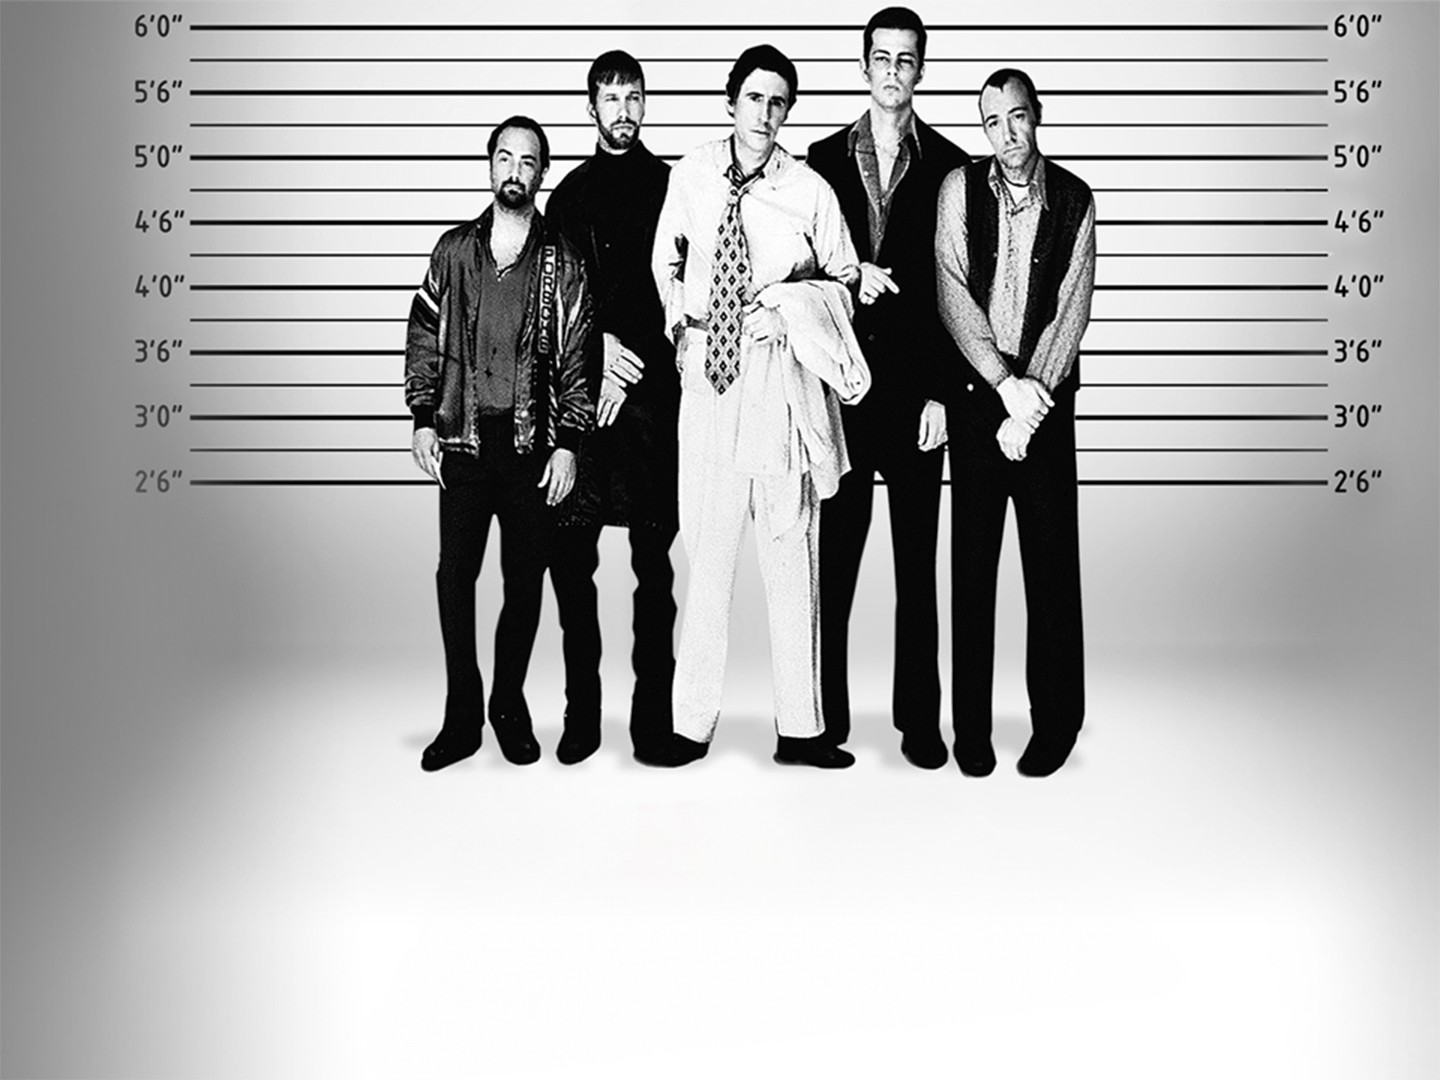 The Usual Suspects - Reviews — The Movie Database (TMDB)